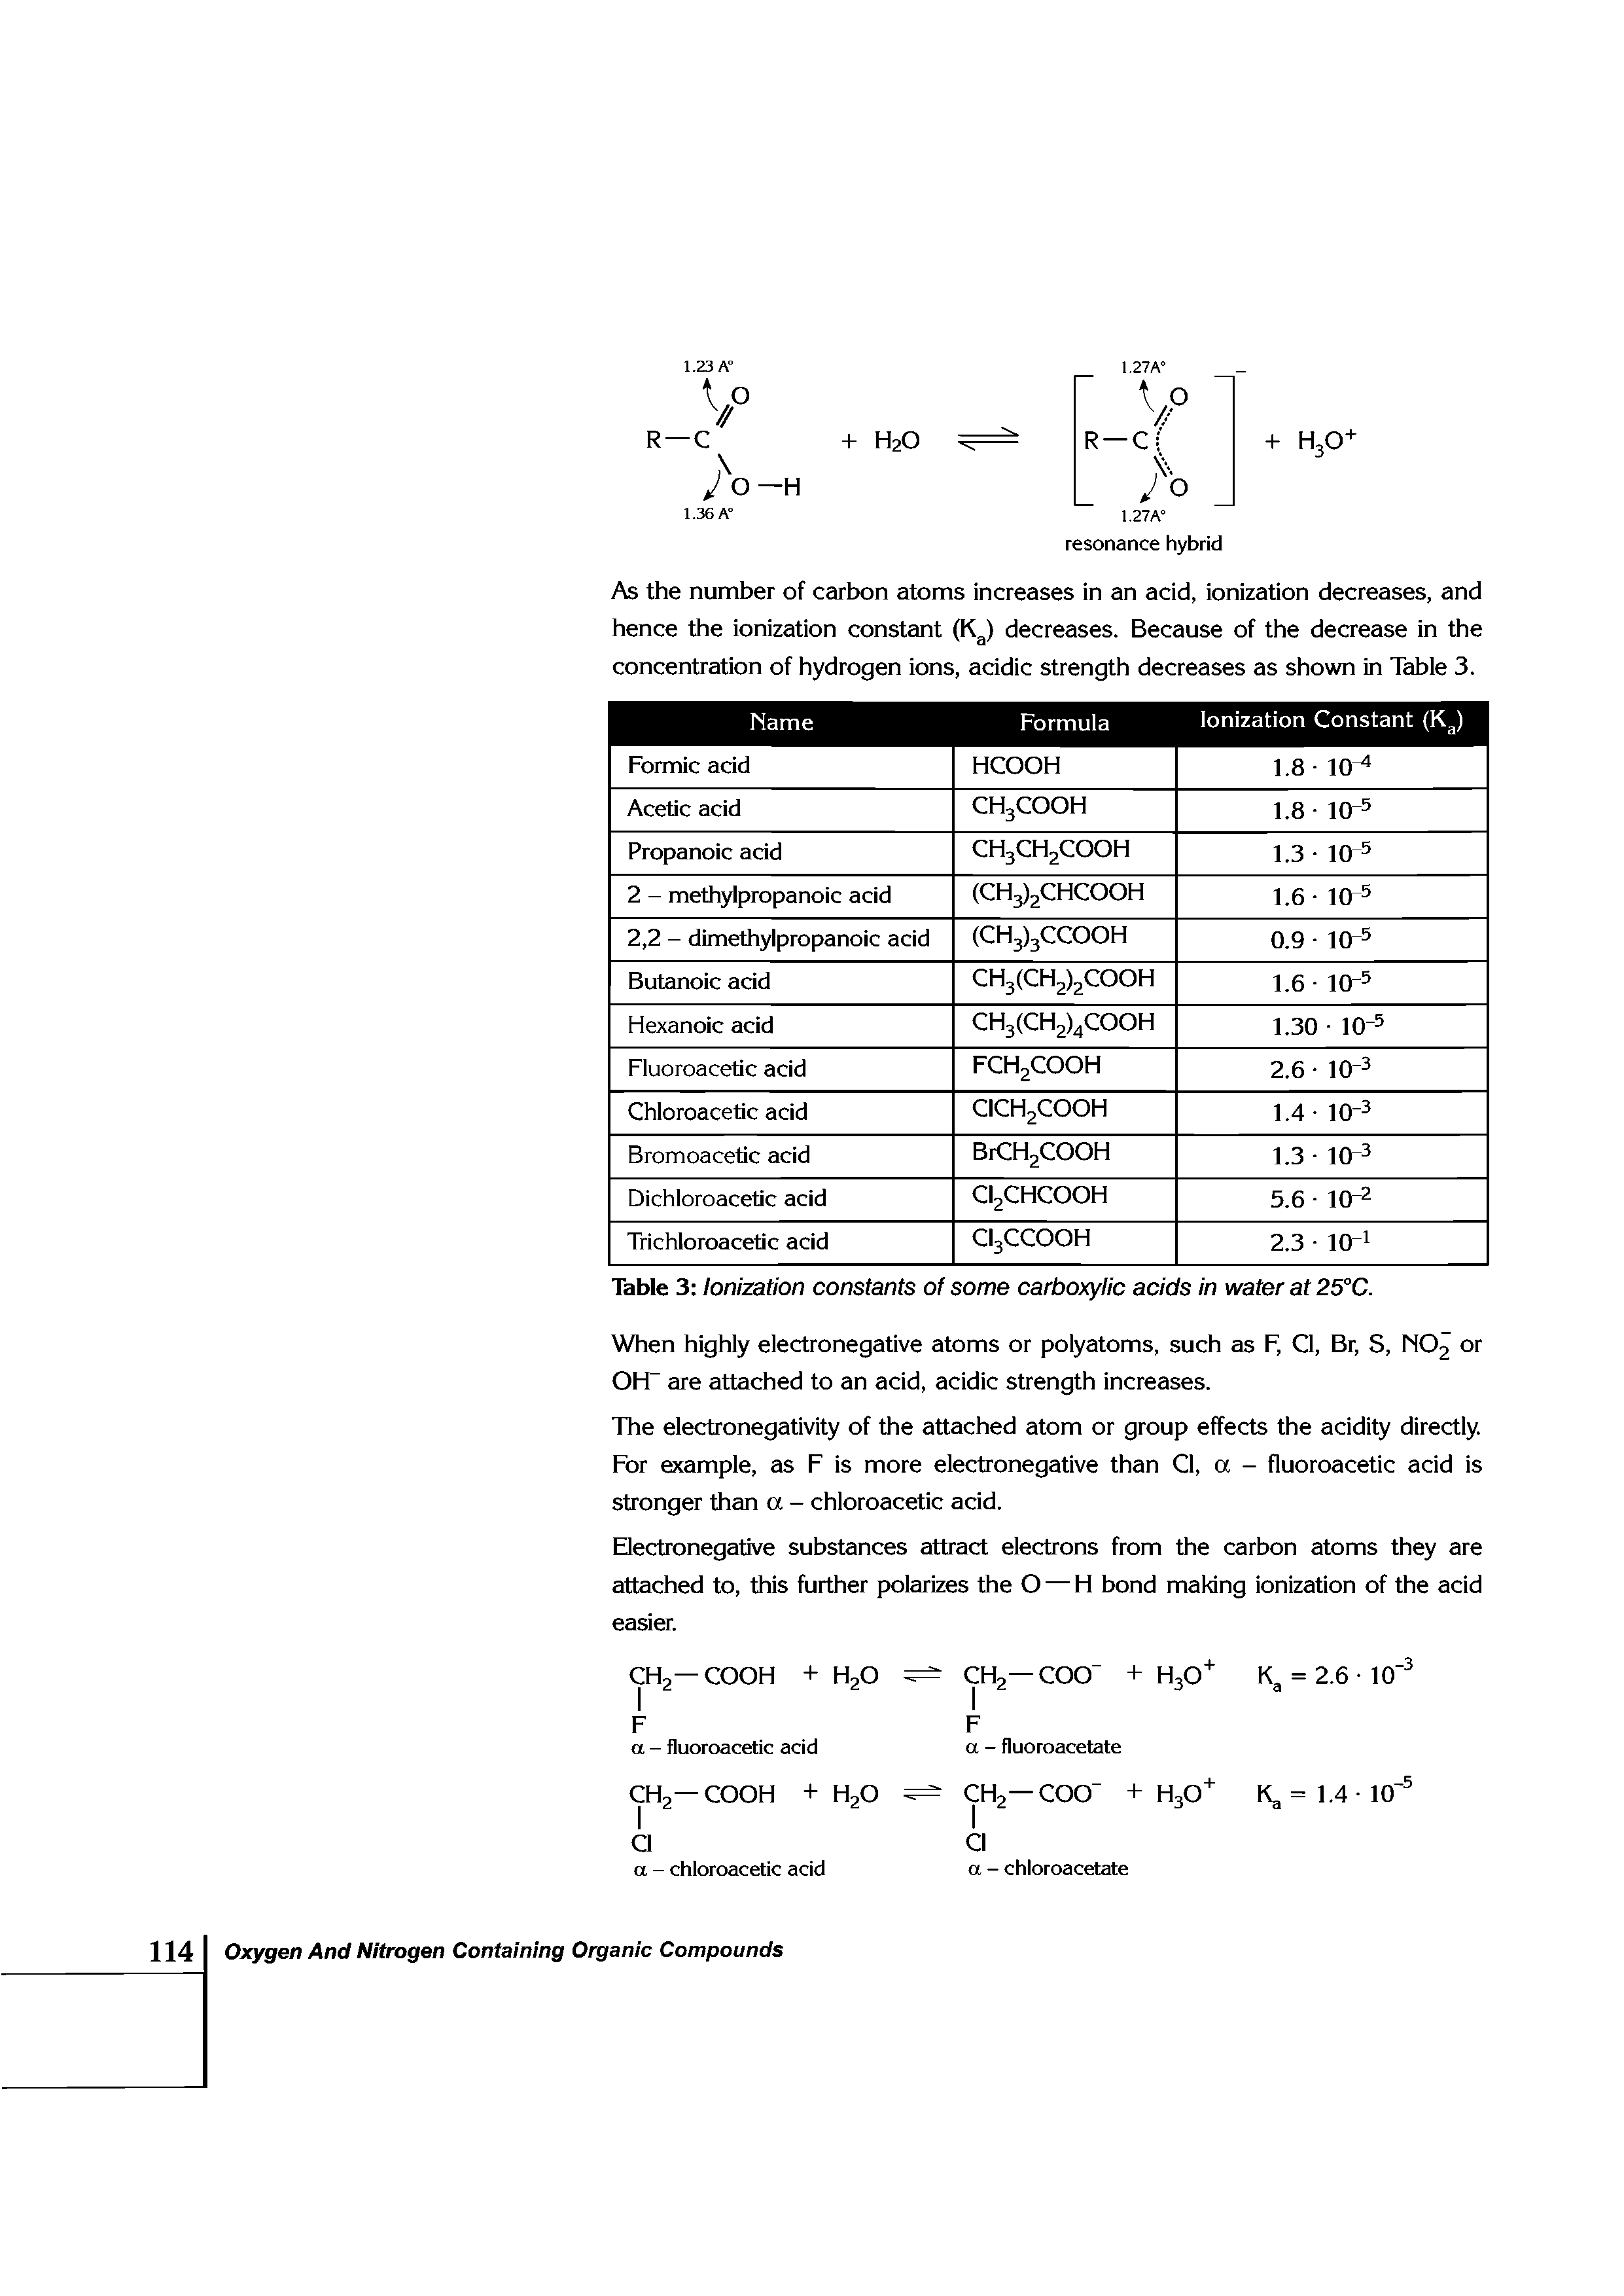 Table 3 Ionization constants of some carboxylic acids in water at 25°C.